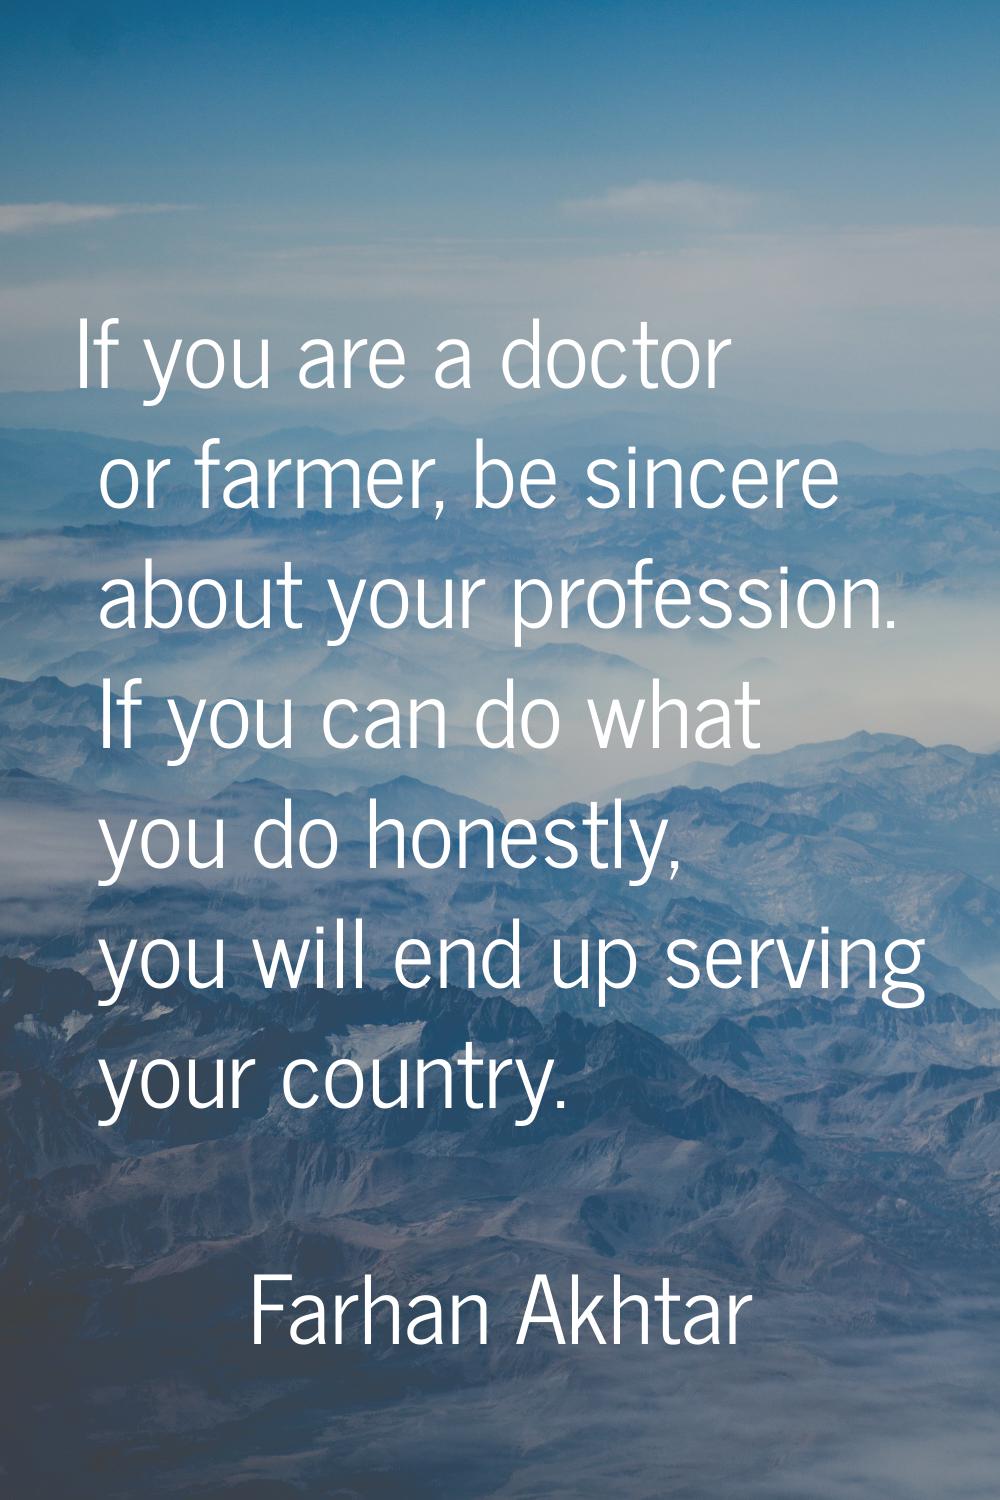 If you are a doctor or farmer, be sincere about your profession. If you can do what you do honestly